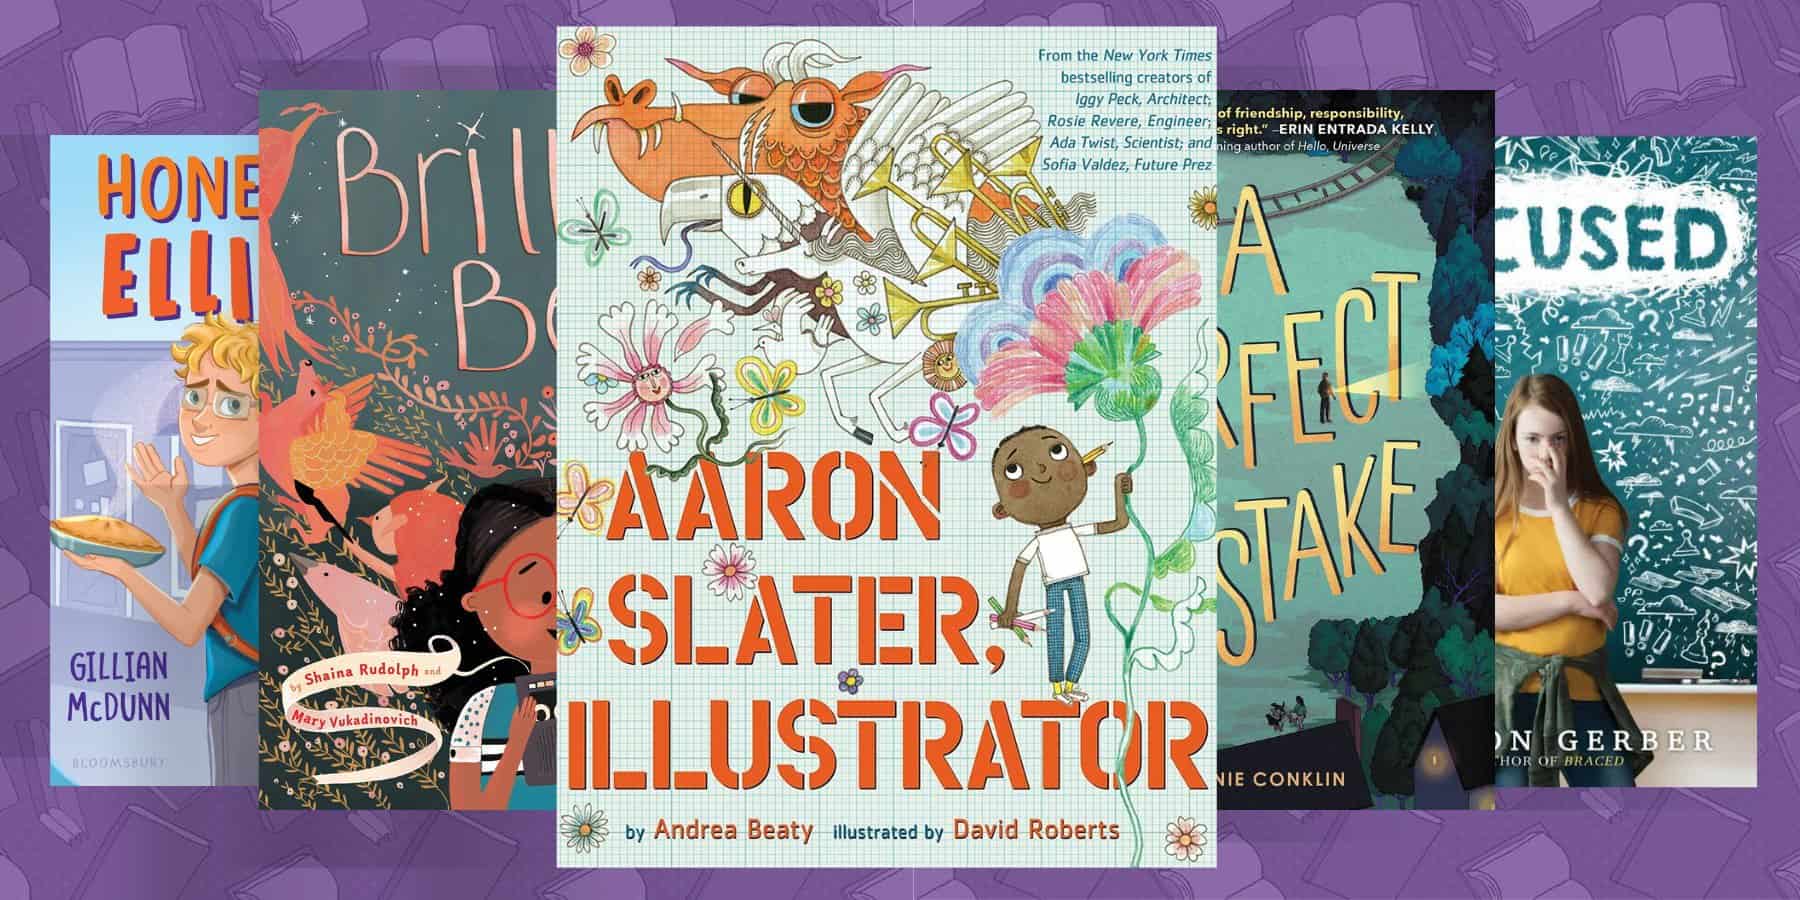 For children who are challenged with learning disabilities, seeing yourself in a story is affirming. These children's books about learning differences are highly recommended.